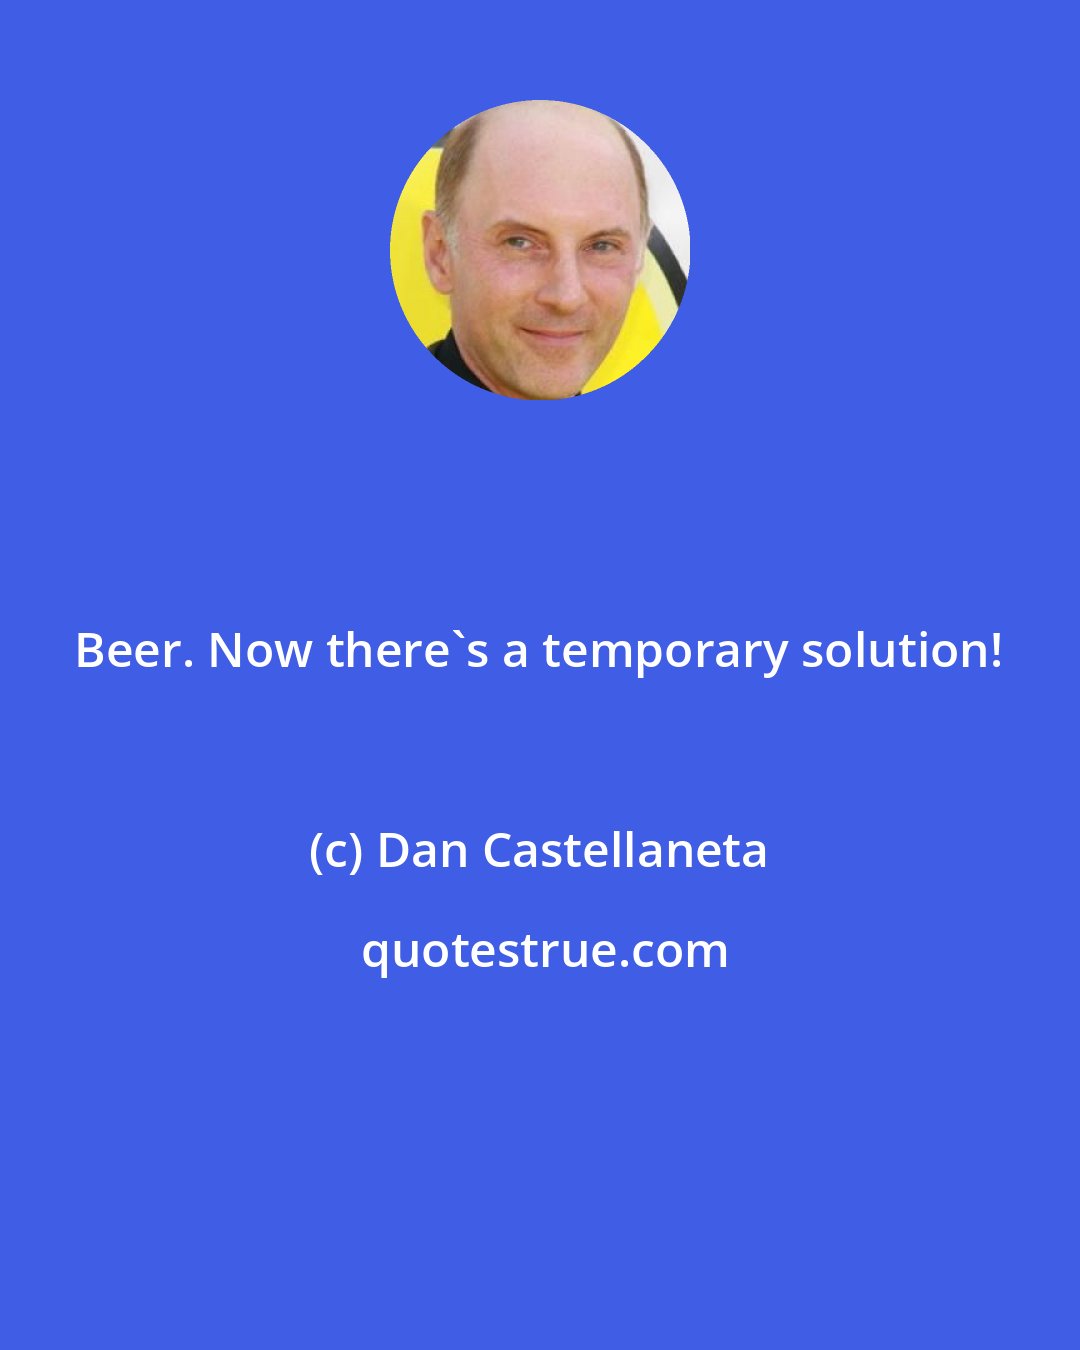 Dan Castellaneta: Beer. Now there's a temporary solution!